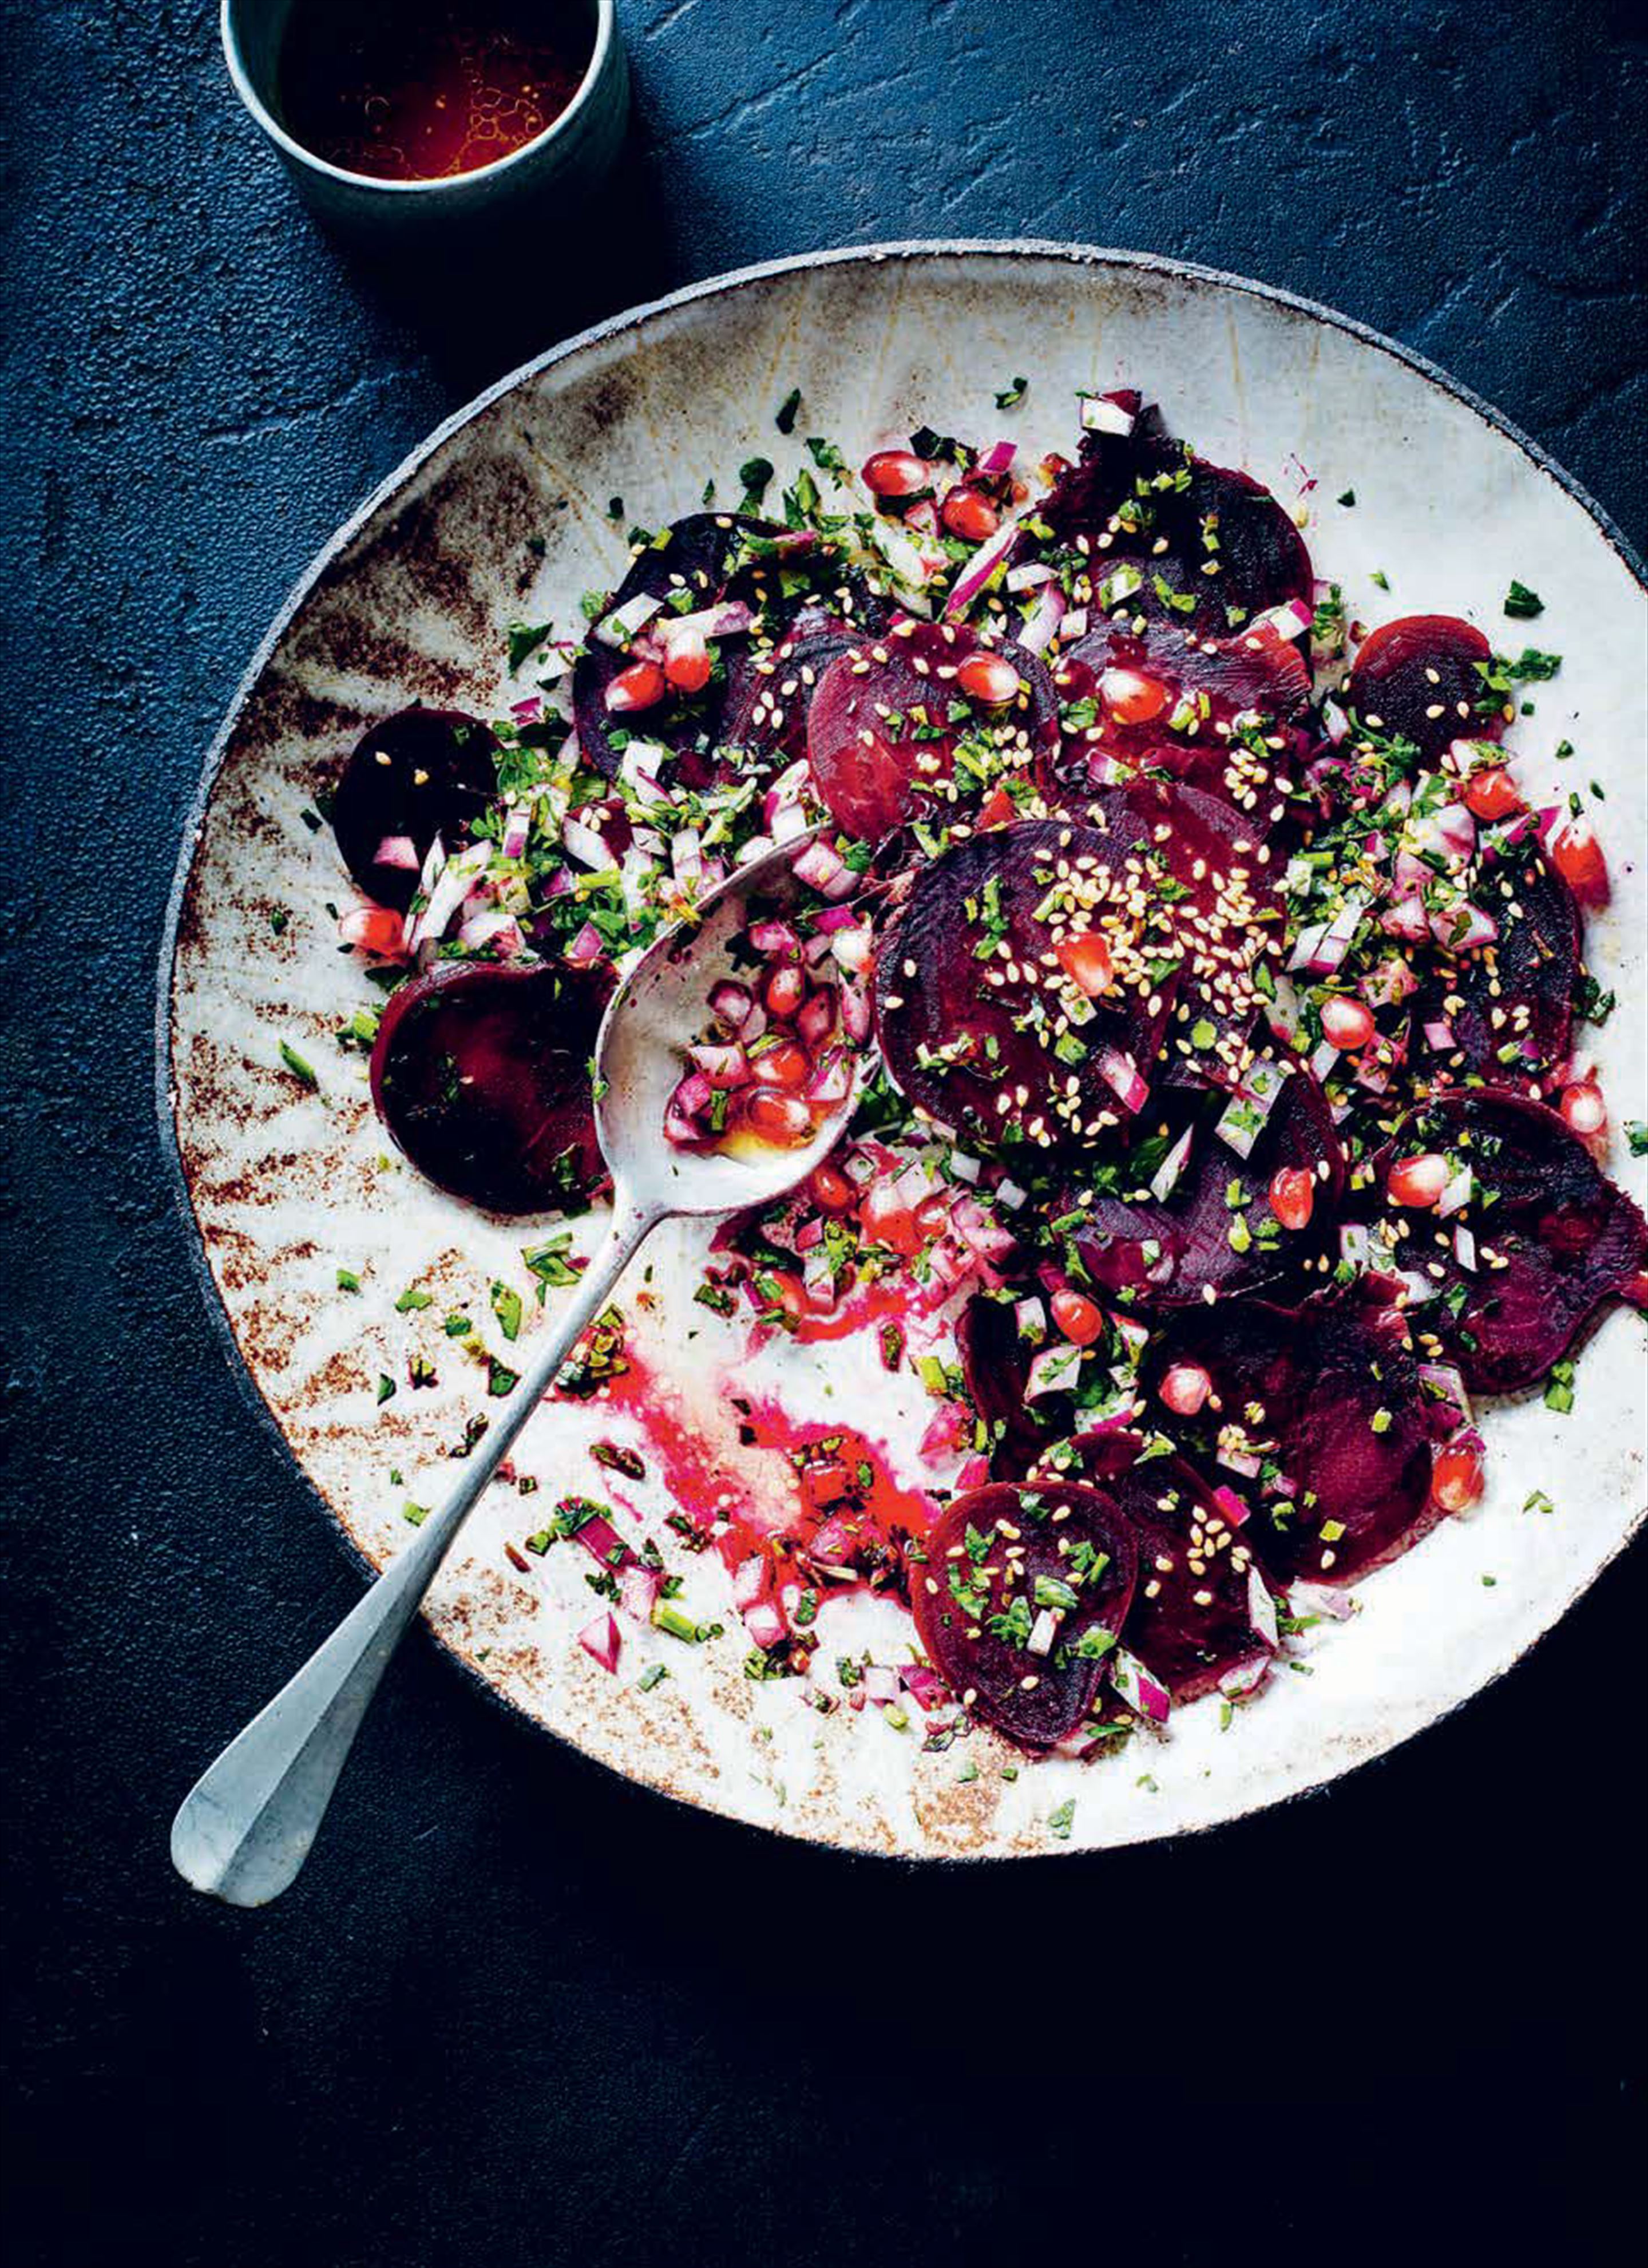 Beetroot salad with pomegranate molasses and sesame seeds